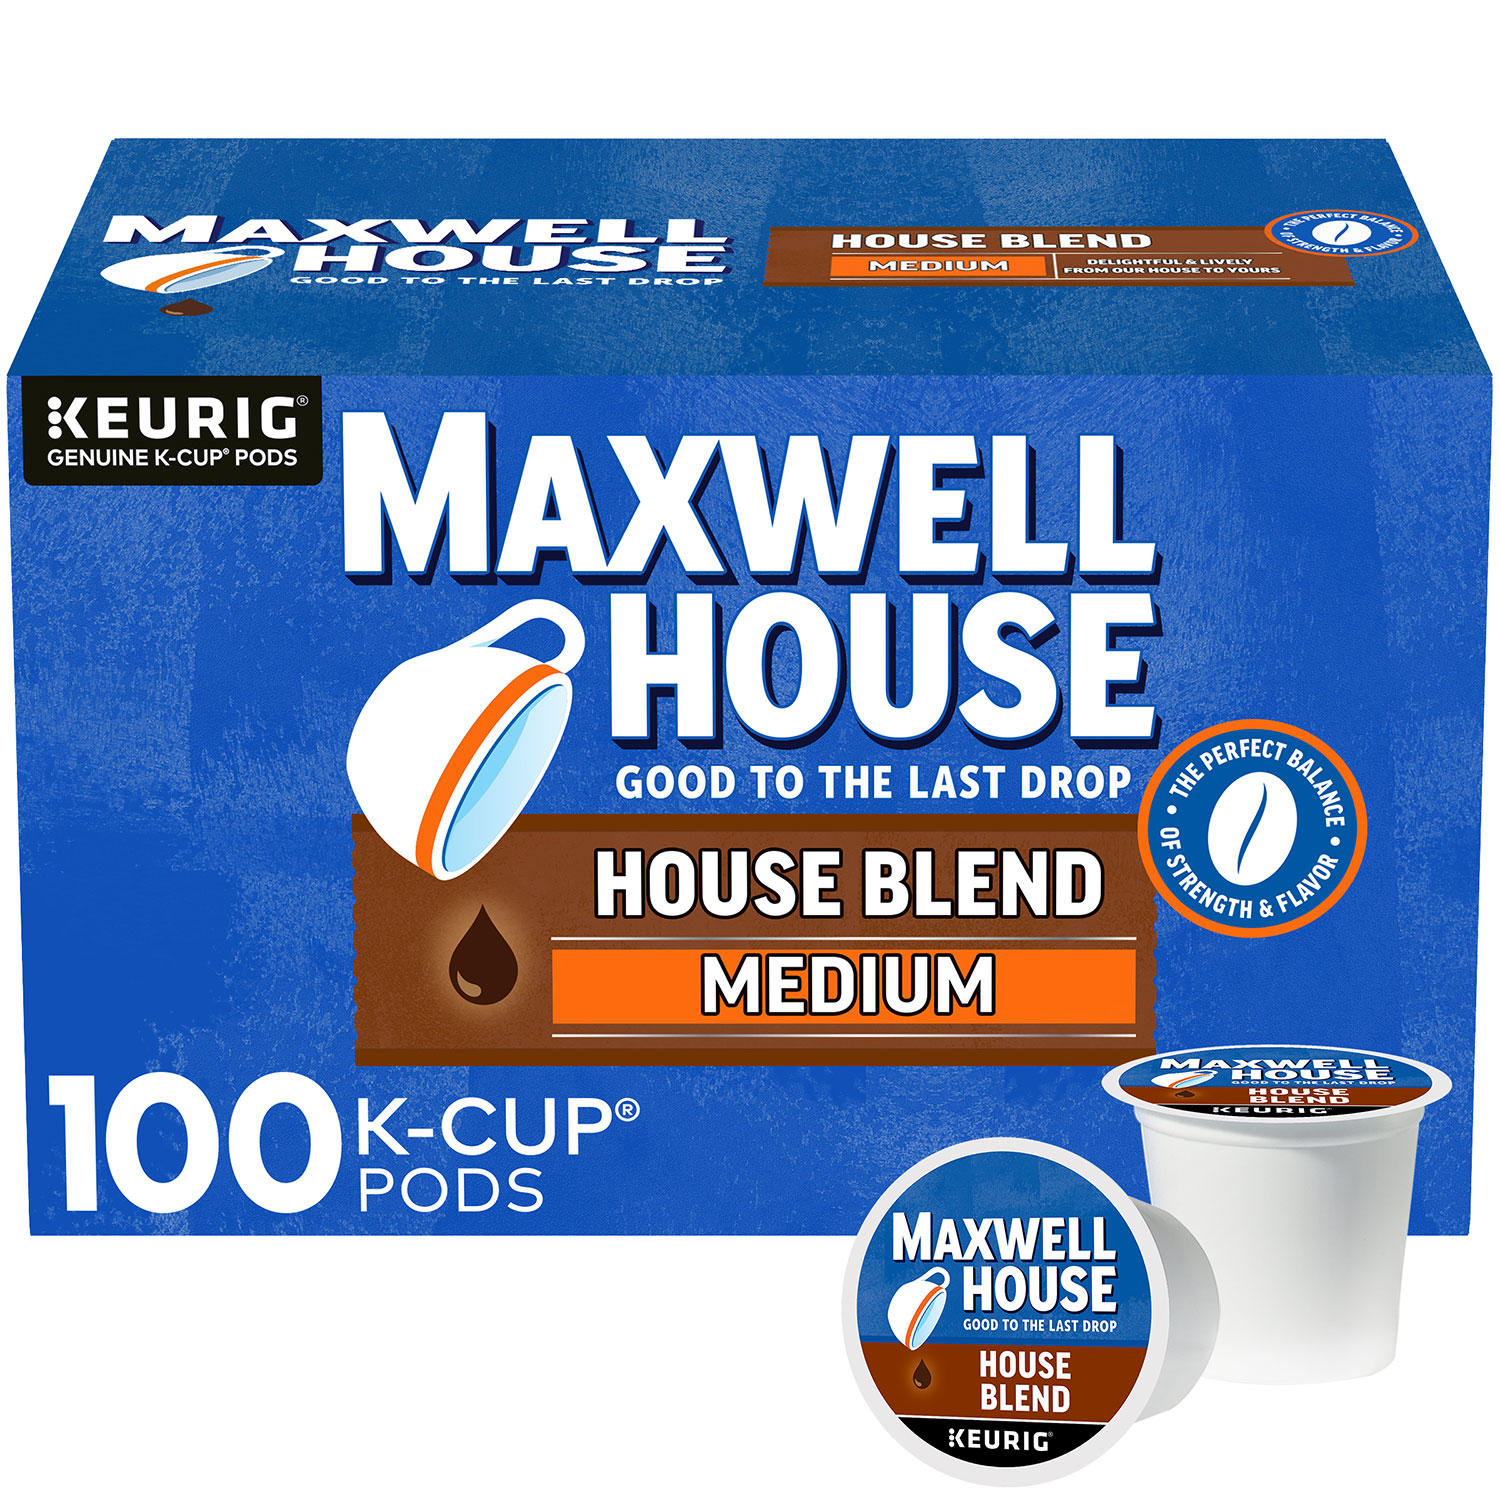 https://bestqualitycoffee.s3.us-east-2.amazonaws.com/wp-content/uploads/2023/06/22042142/Maxwell-House-House-Blend-Medium-Roast-K-Cup-Coffee-Pods-31-oz-100-ct.jpg